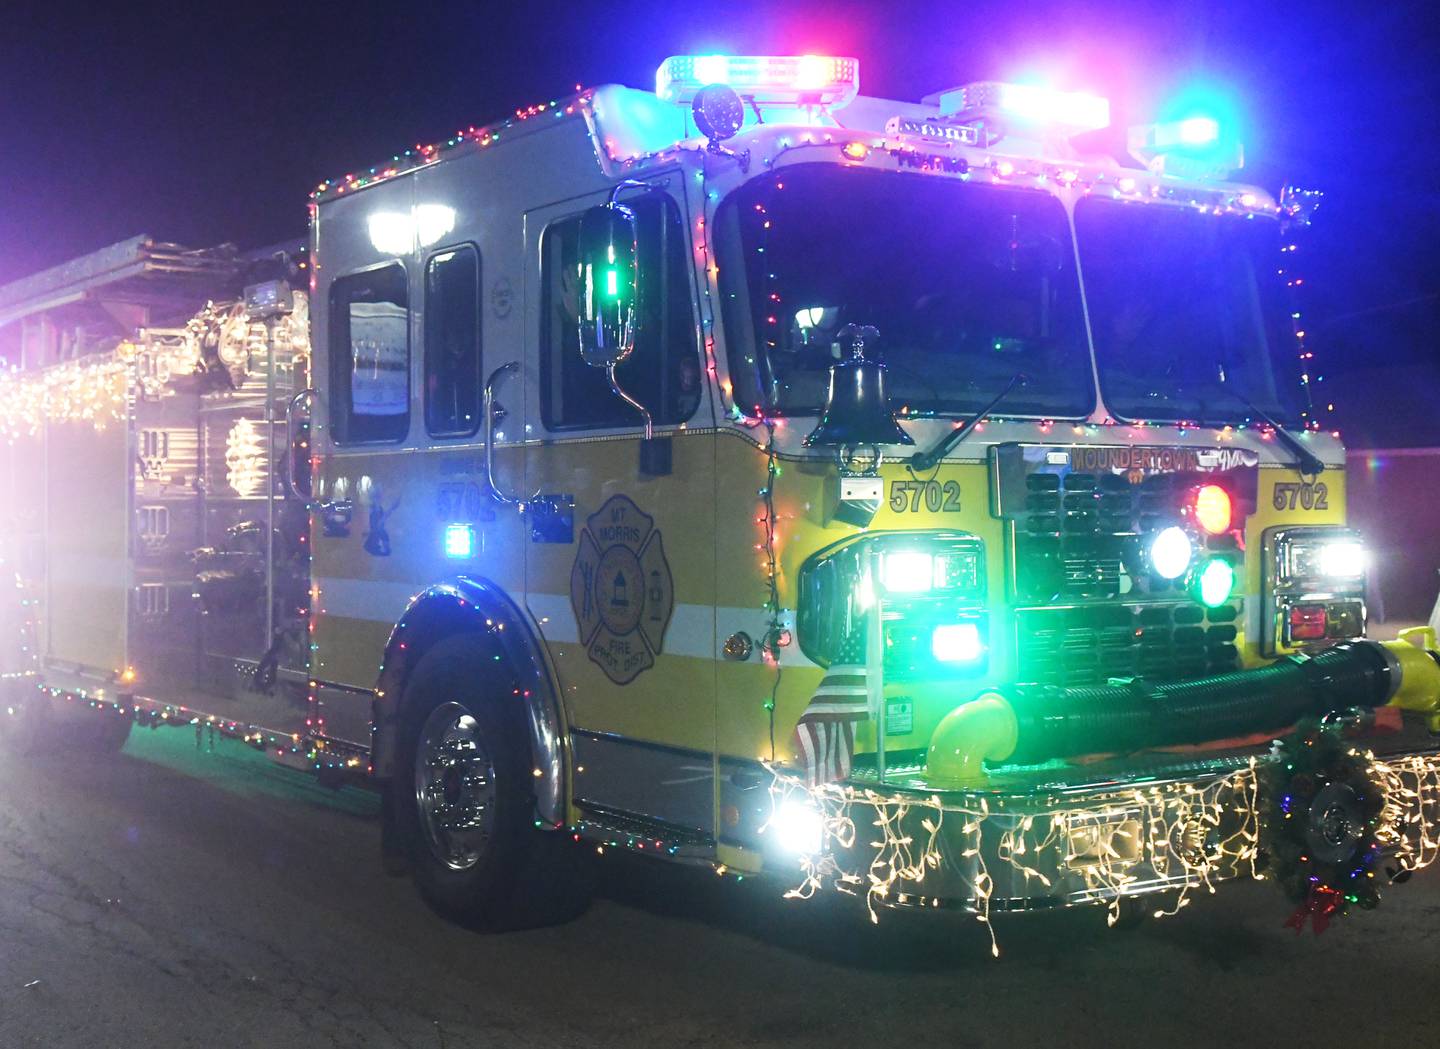 Mt. Morris Fire vehicles, decorated for Christmas, led the way at the lighted parade that kicked off Mt. Morris' Festival of Lights on Dec.3.